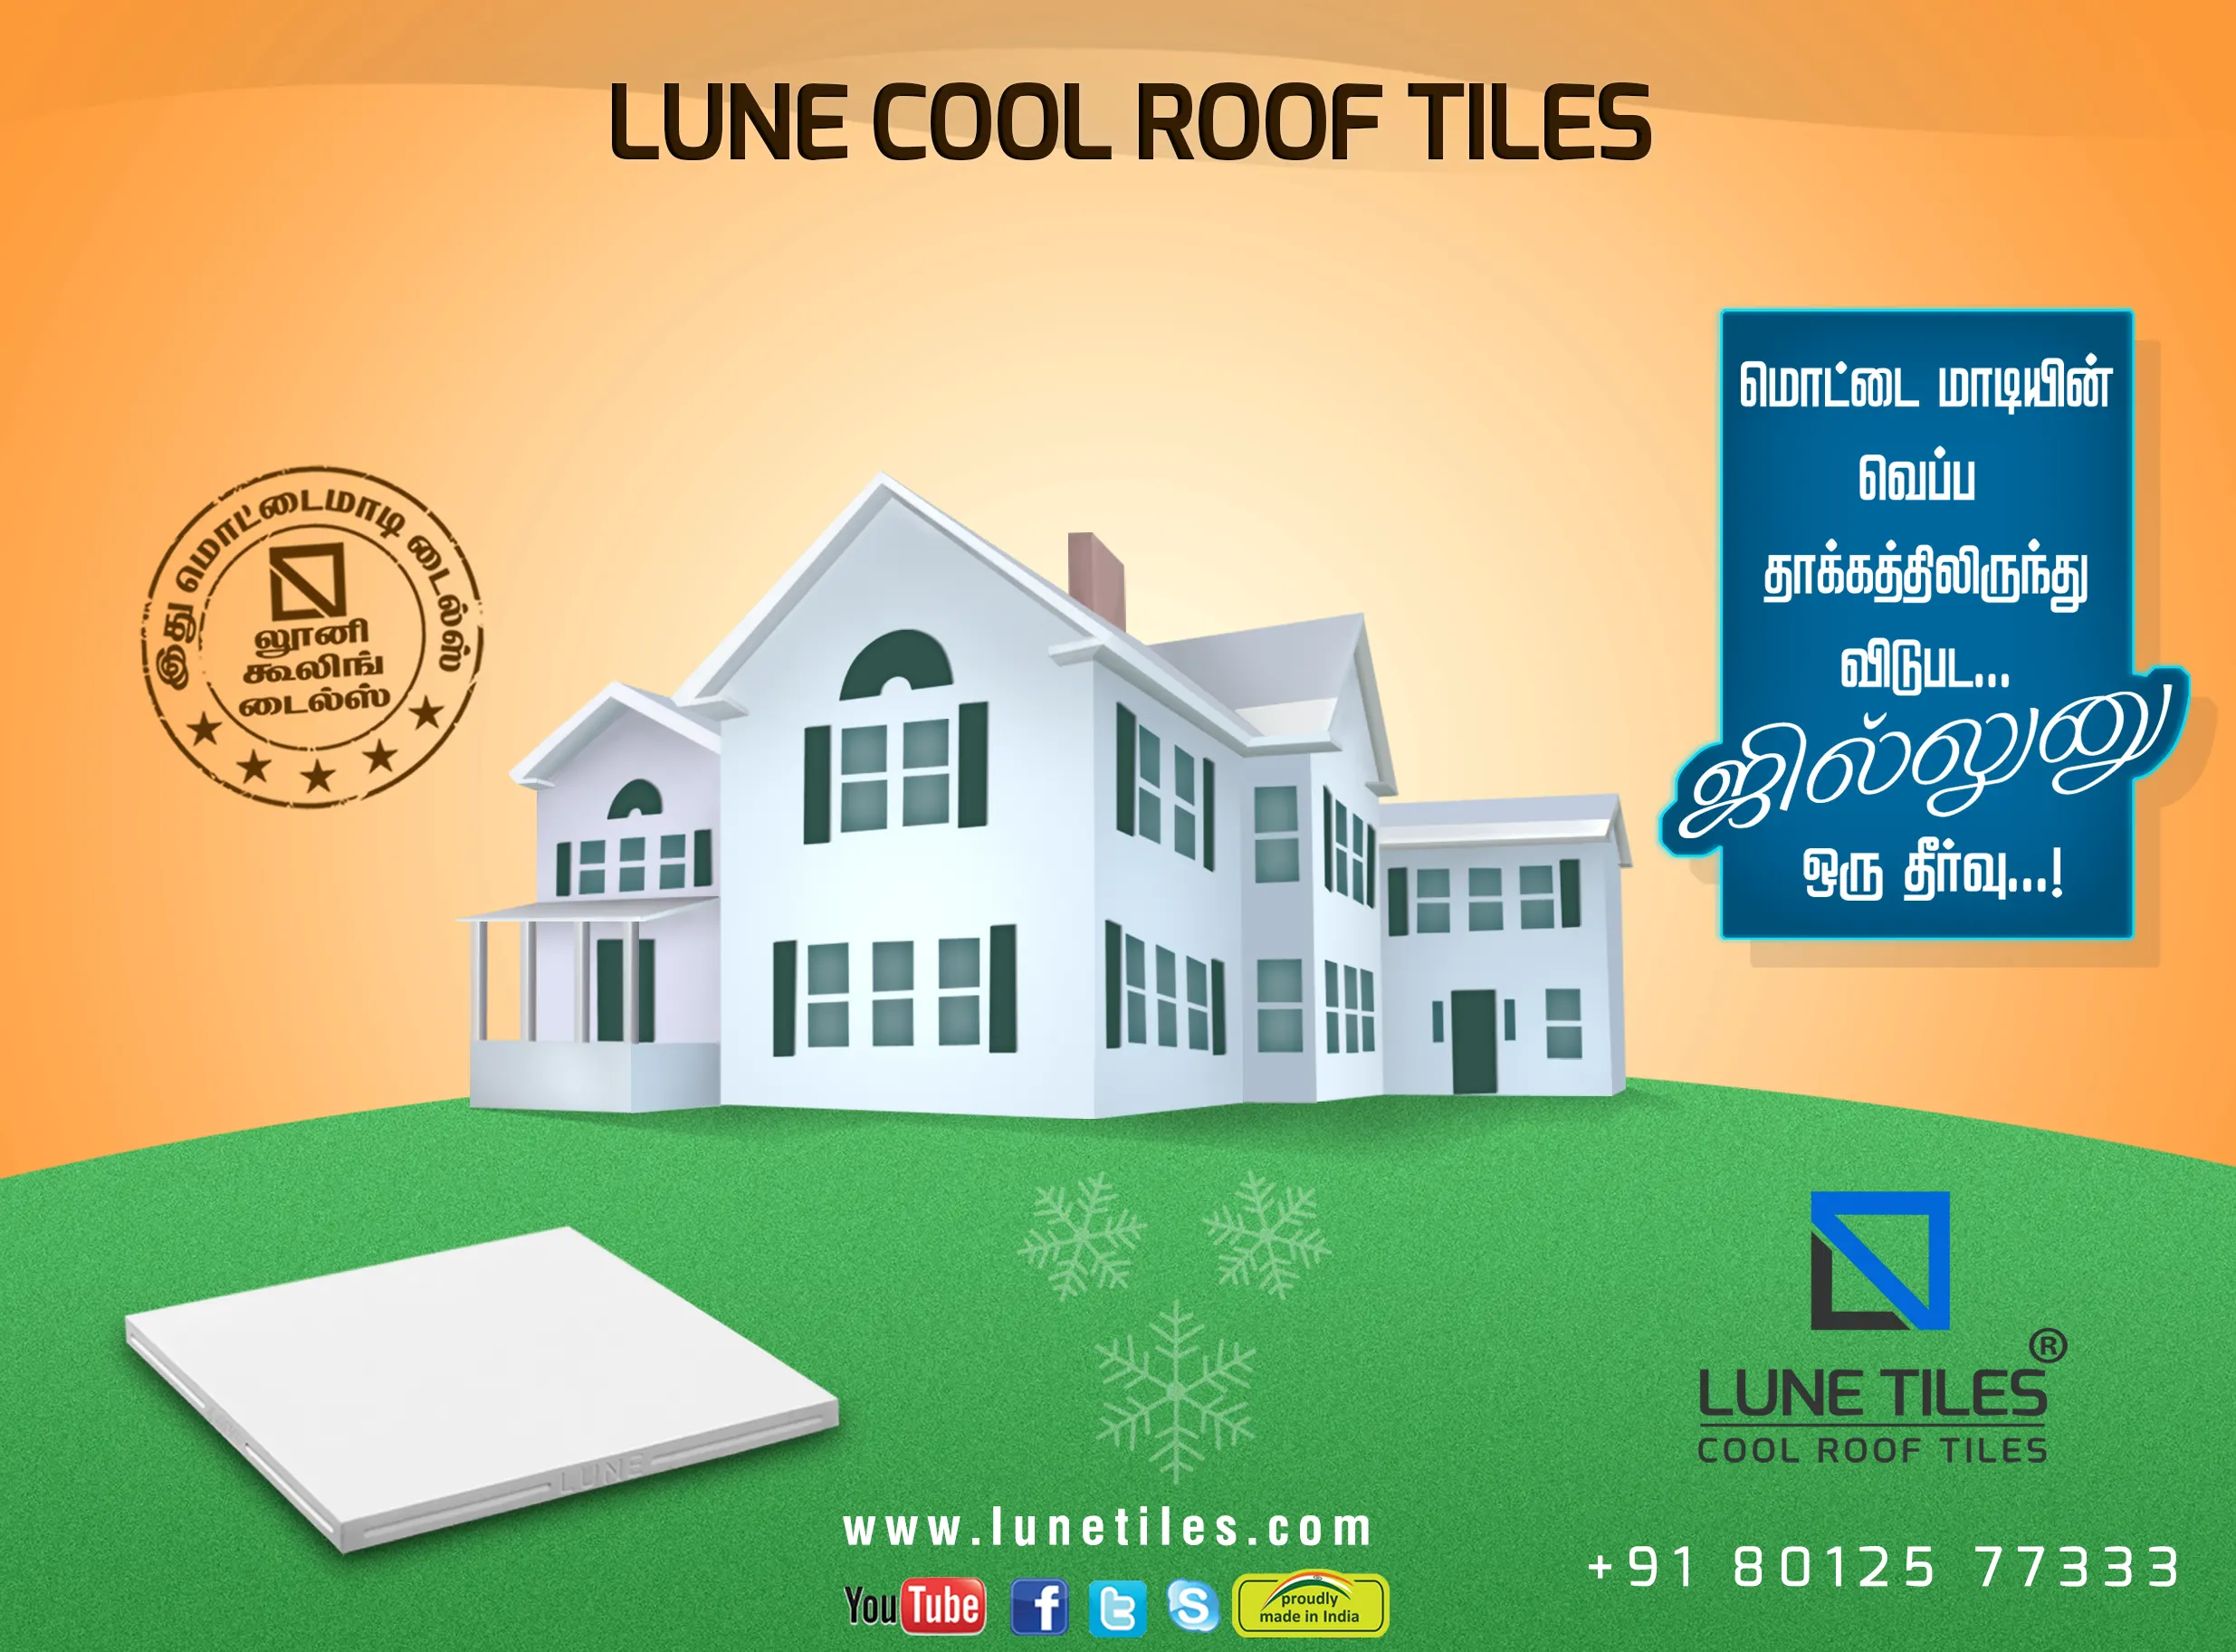 Cool Roof tiles, Heat resistance tiles, Cool tiles, Thermal insulation tiles, cooling tiles, Weathering tiles and White tiles